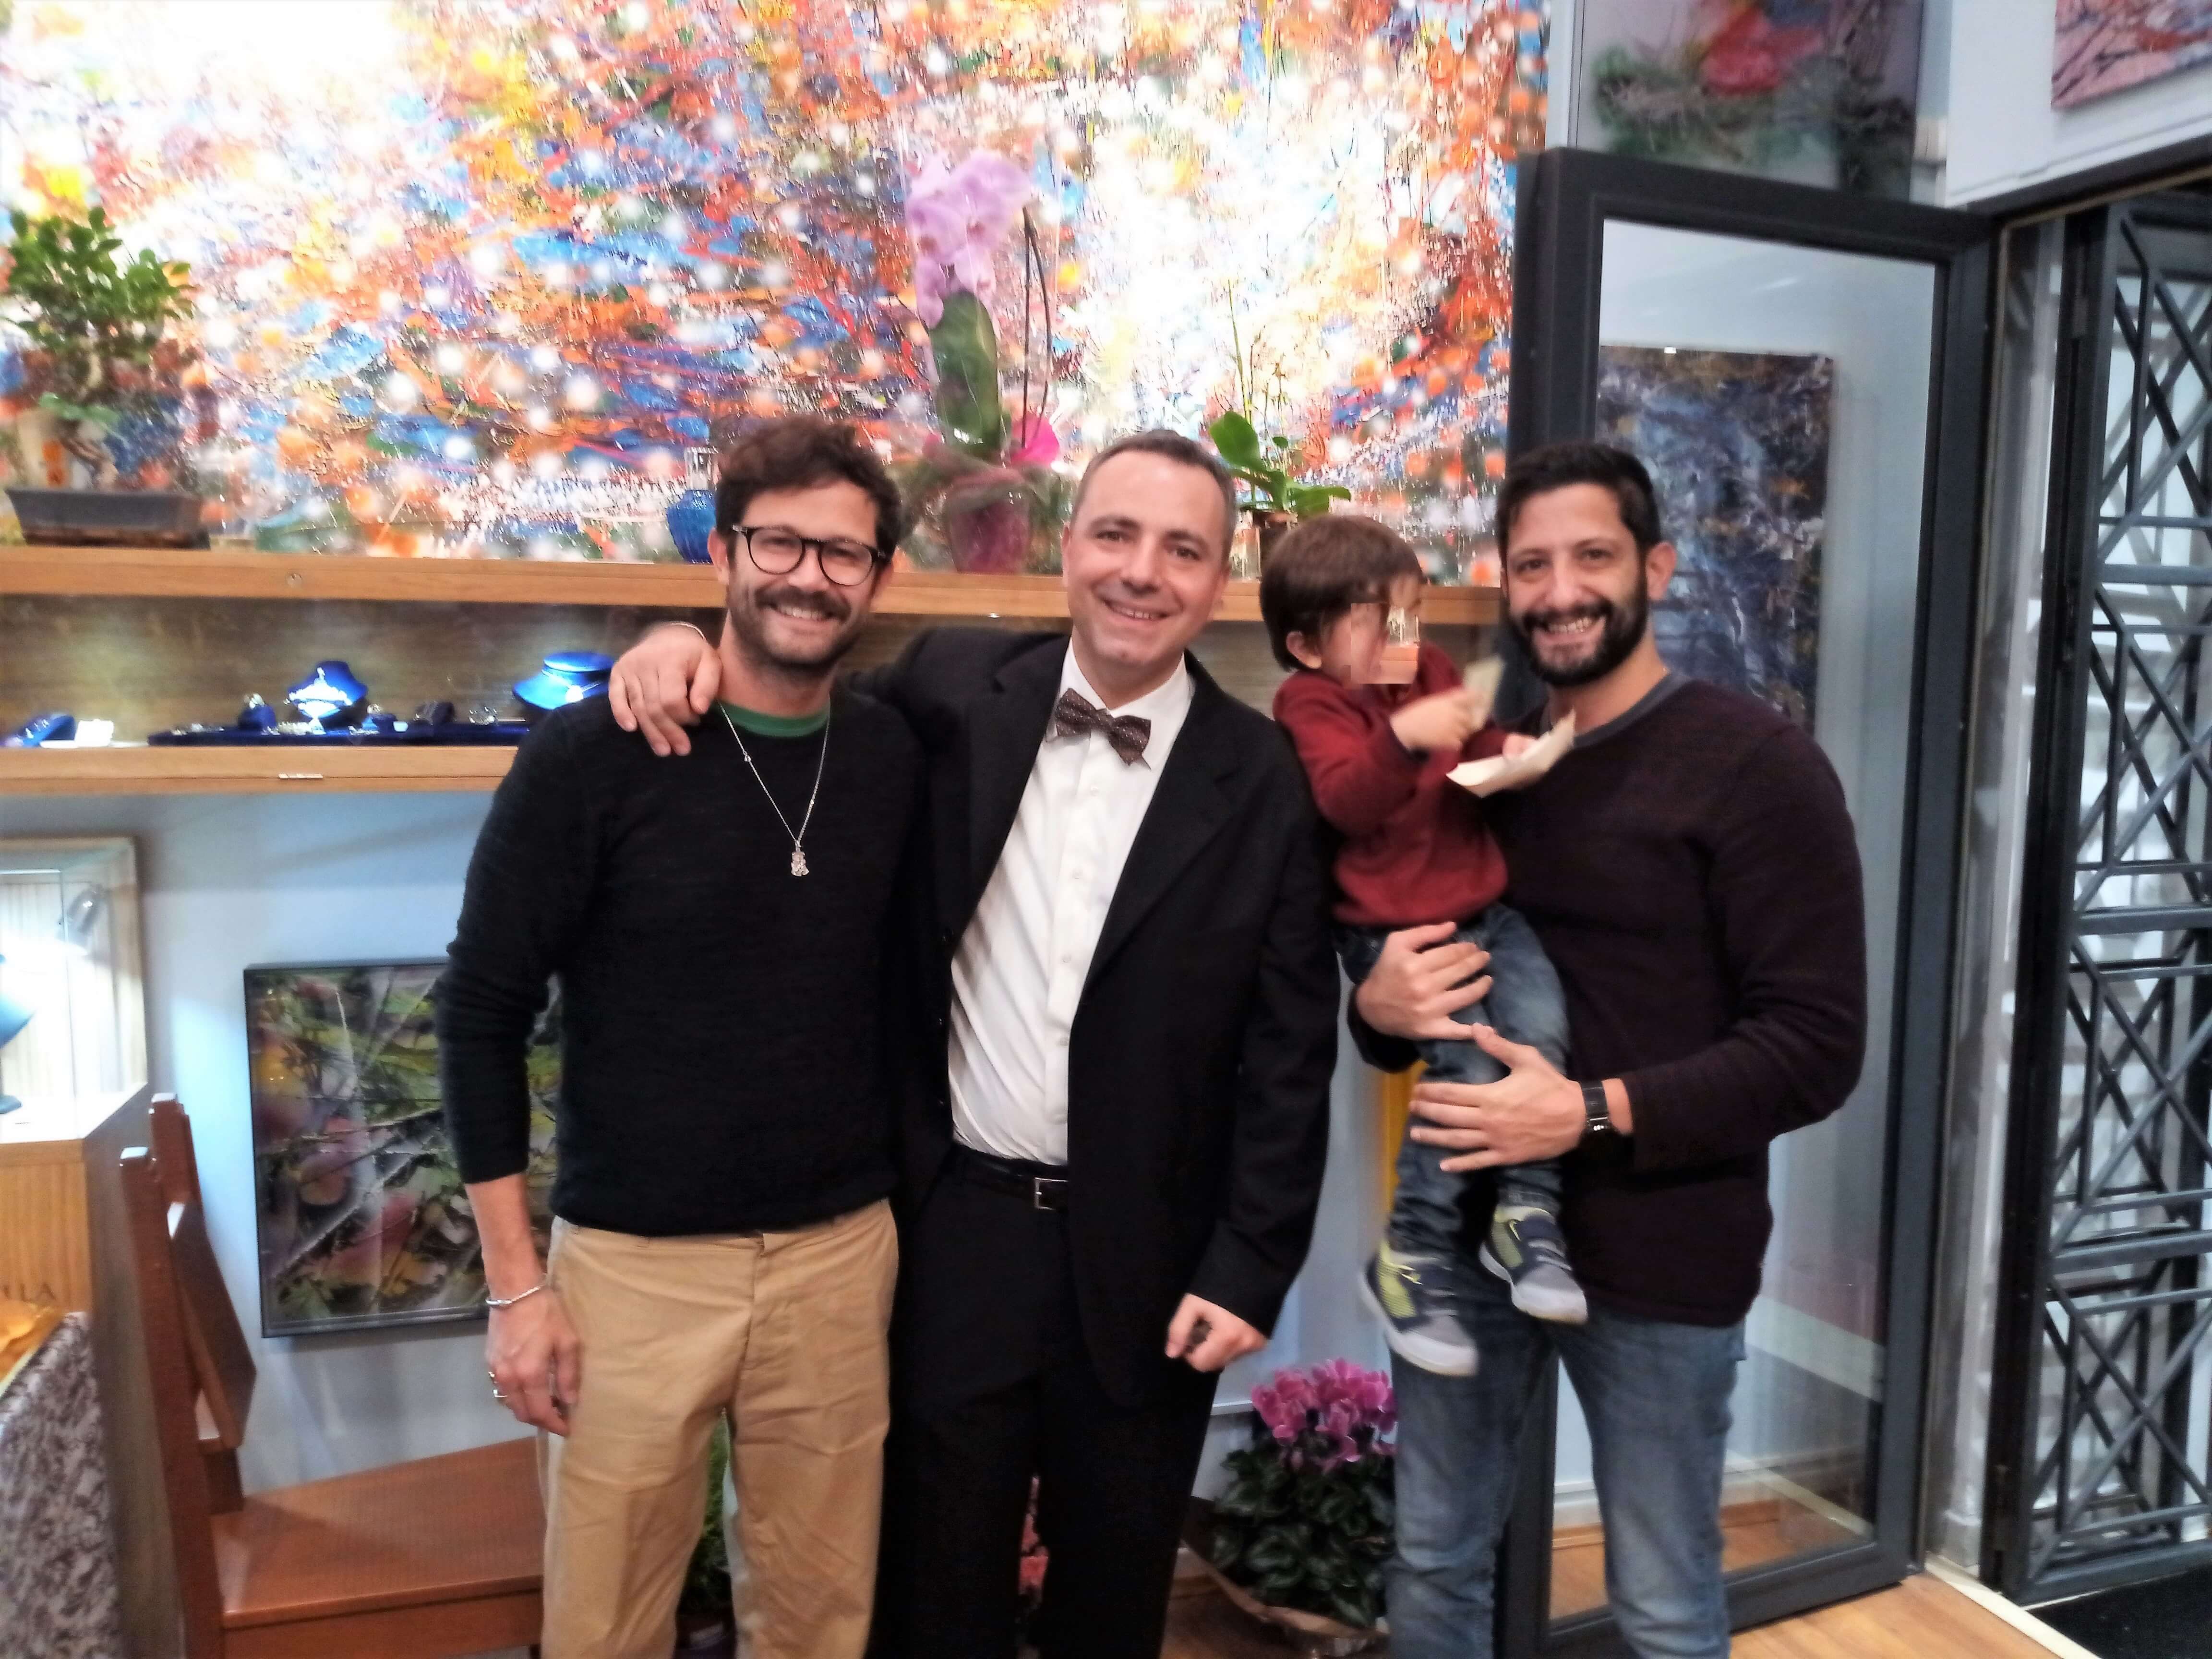 Gino's sons at the opening of my art Studio.